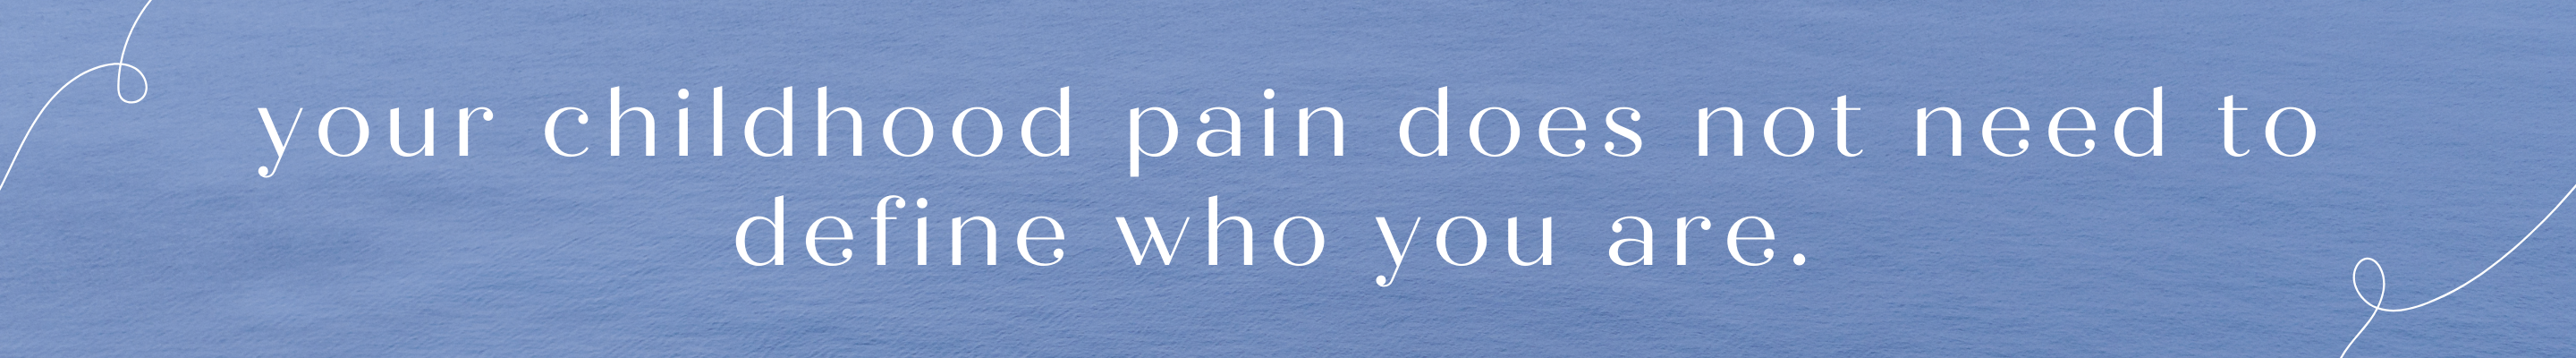 Your childhood pain does not need to define who you are.